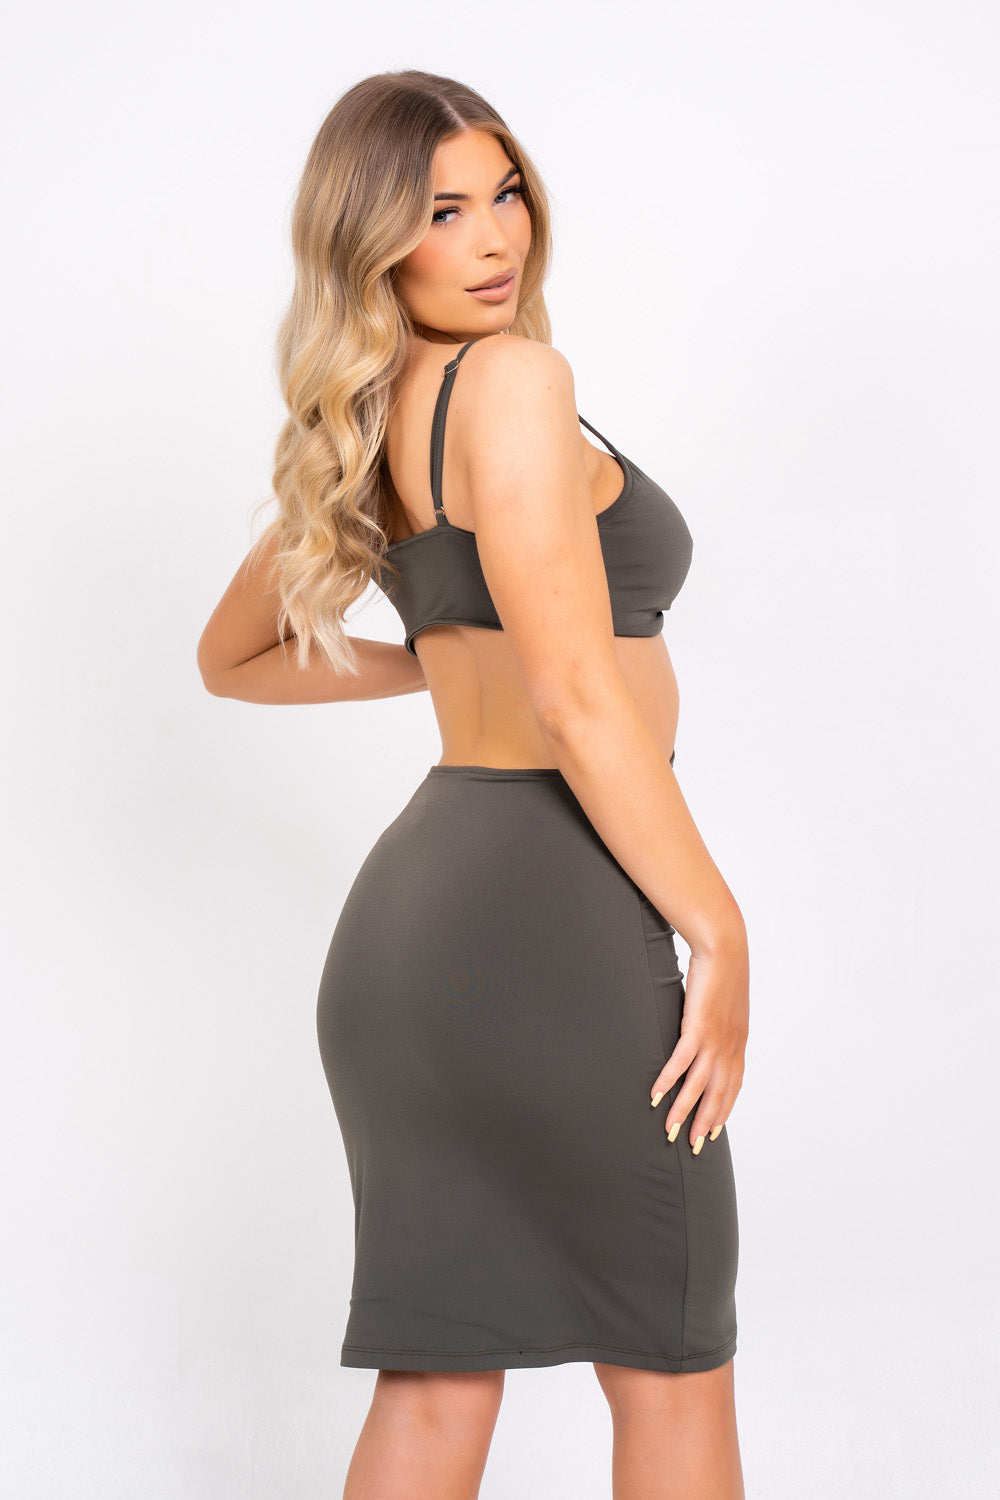 Try Your Luck Khaki Slinky Bodycon Strappy Cut Out Mini Dress